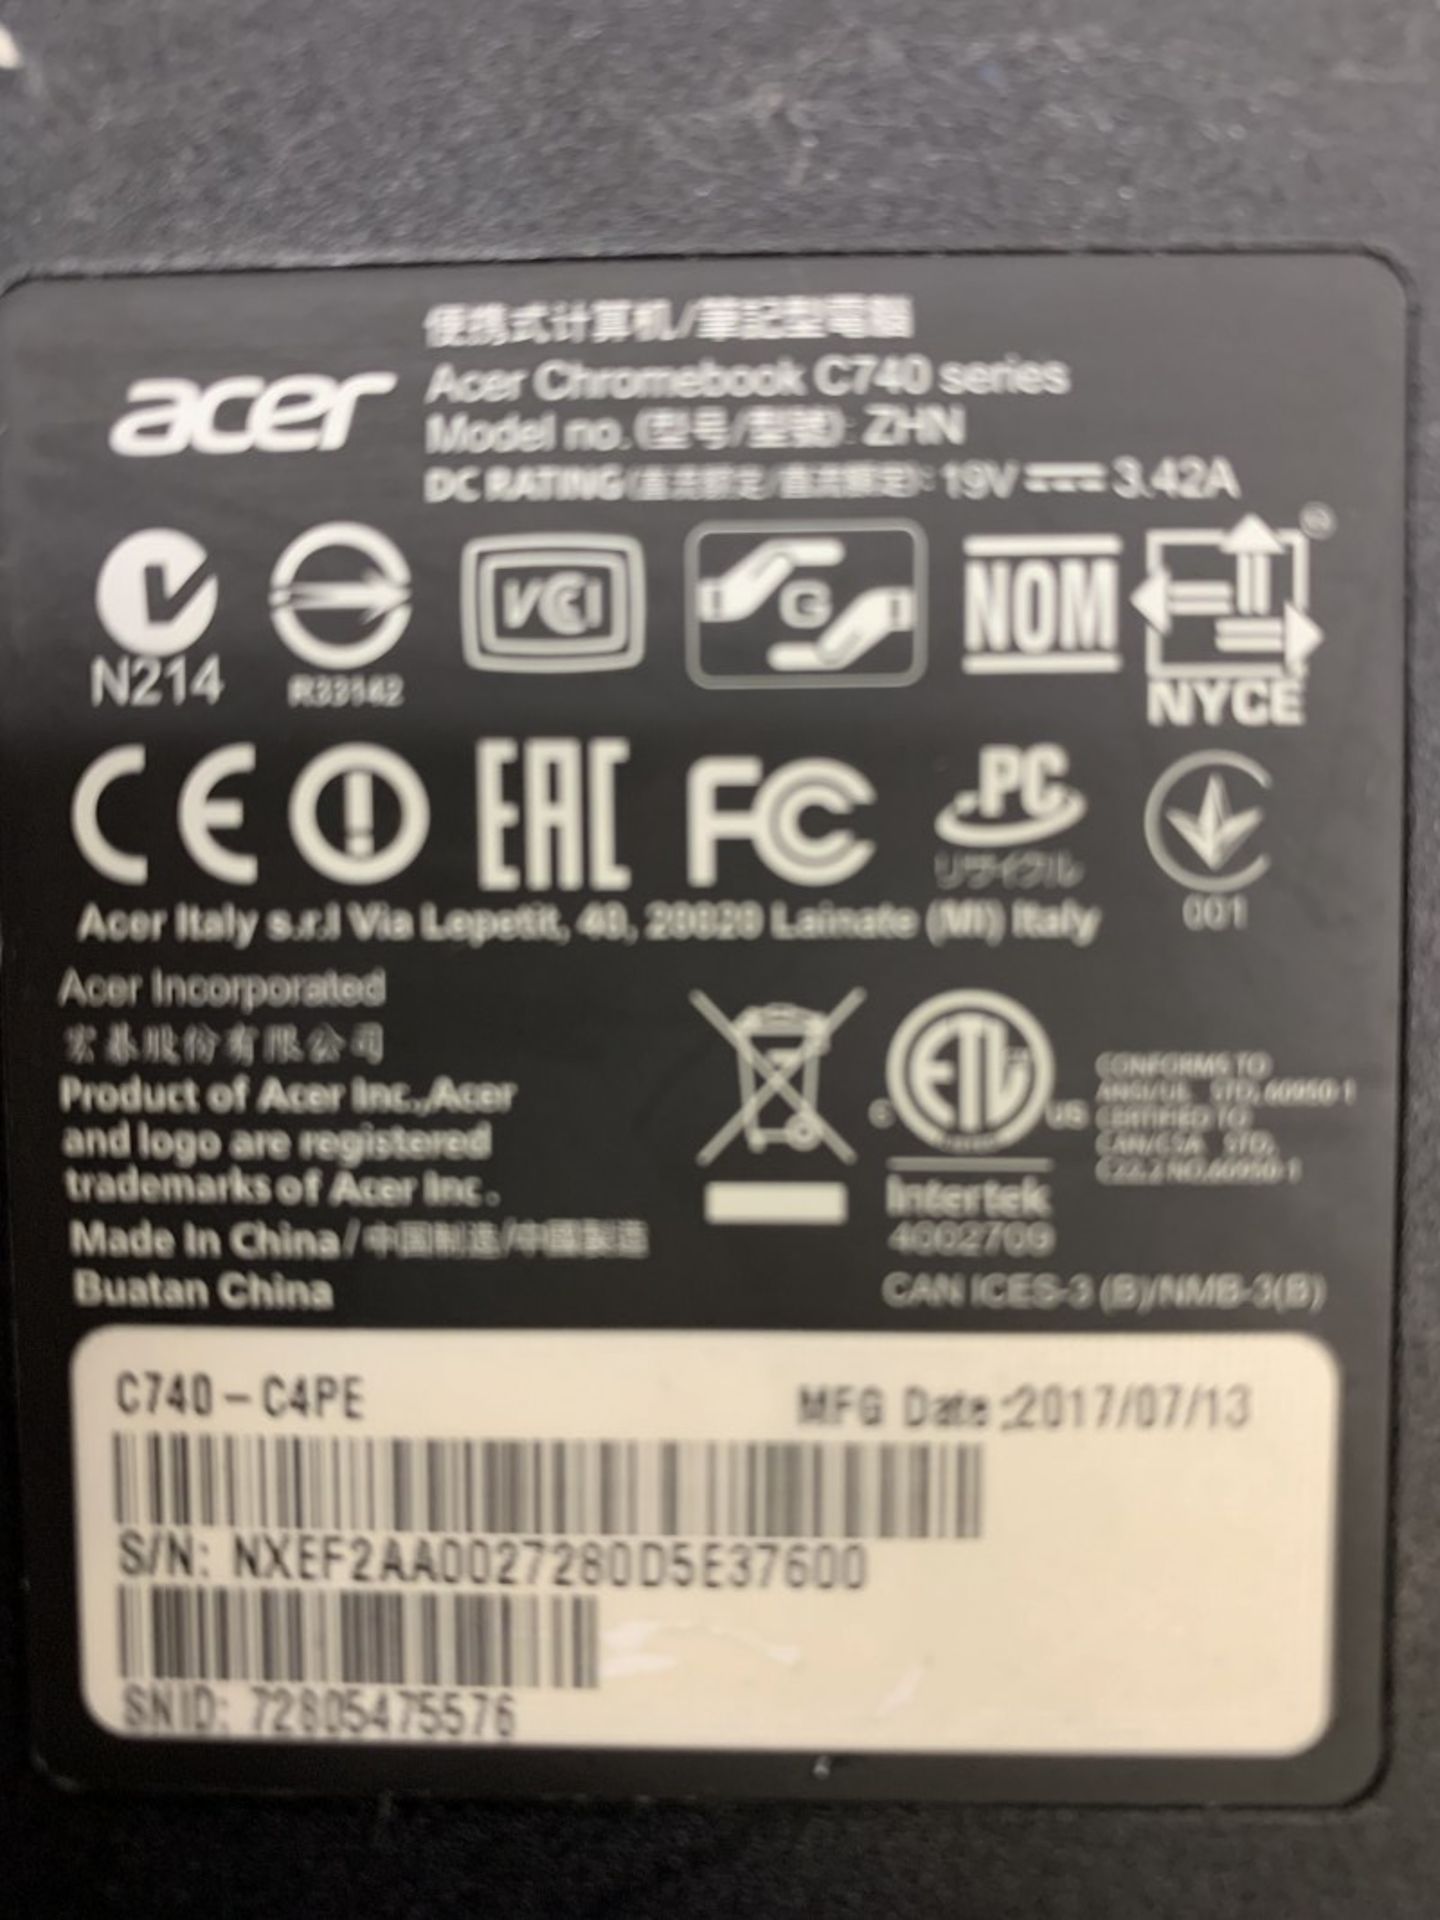 Acer - Chromebook C740 Series 11.6-Inch Hd, 4 Gb, 16Gb Ssd - Image 2 of 2